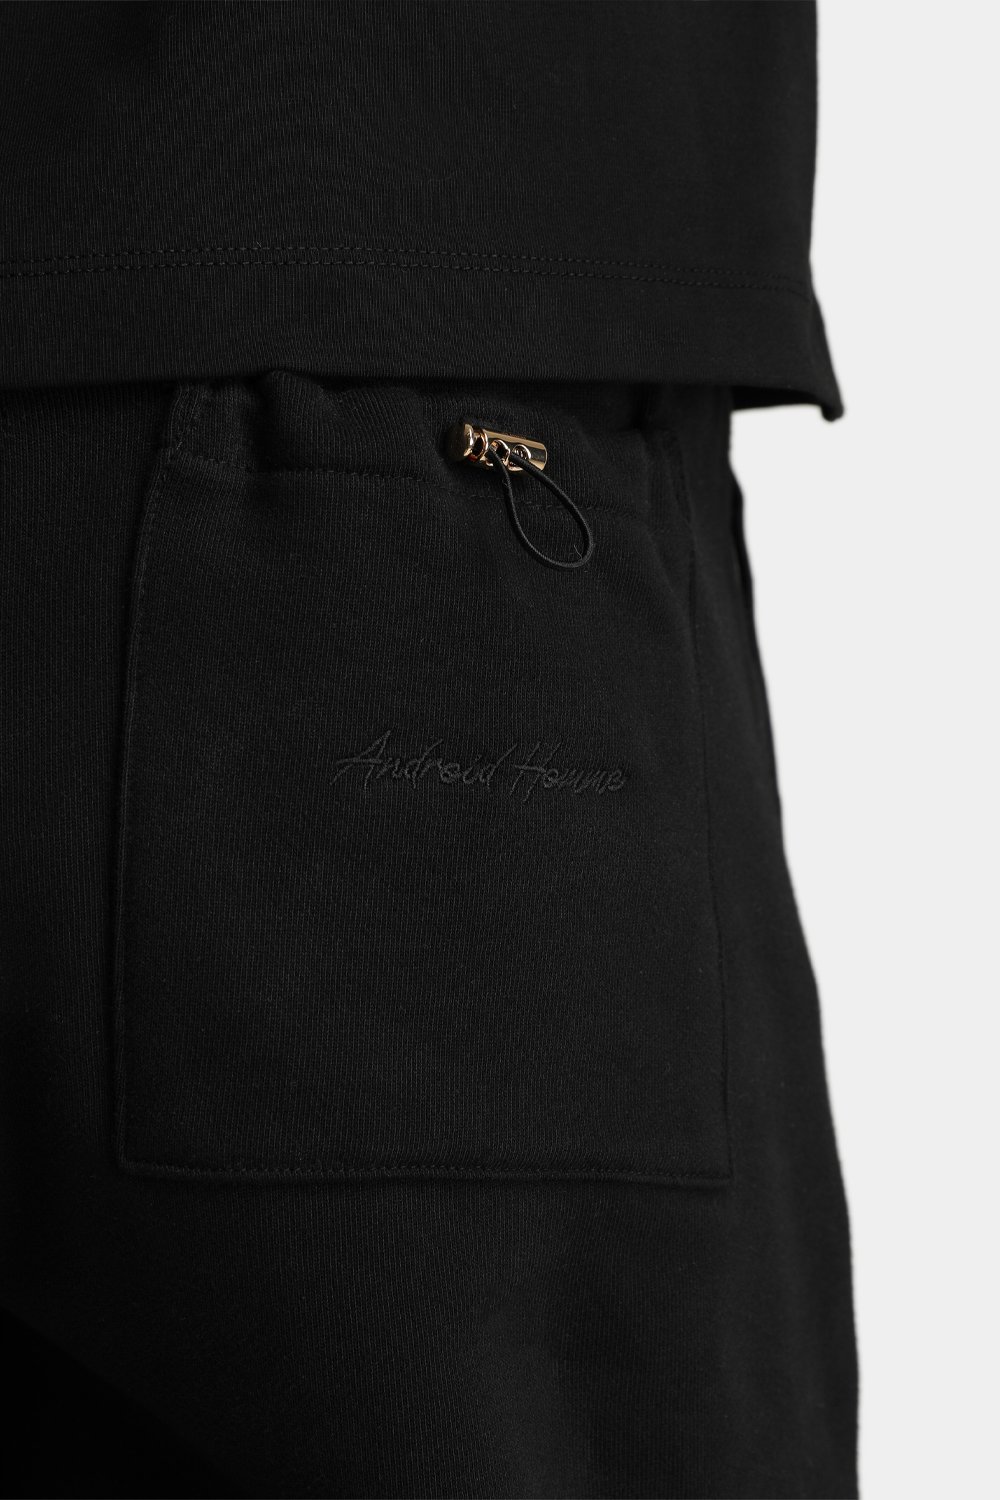 Buy the Android Homme Toggle Detail Jogger Black at Intro. Spend £50 for free UK delivery. Official stockists. We ship worldwide.